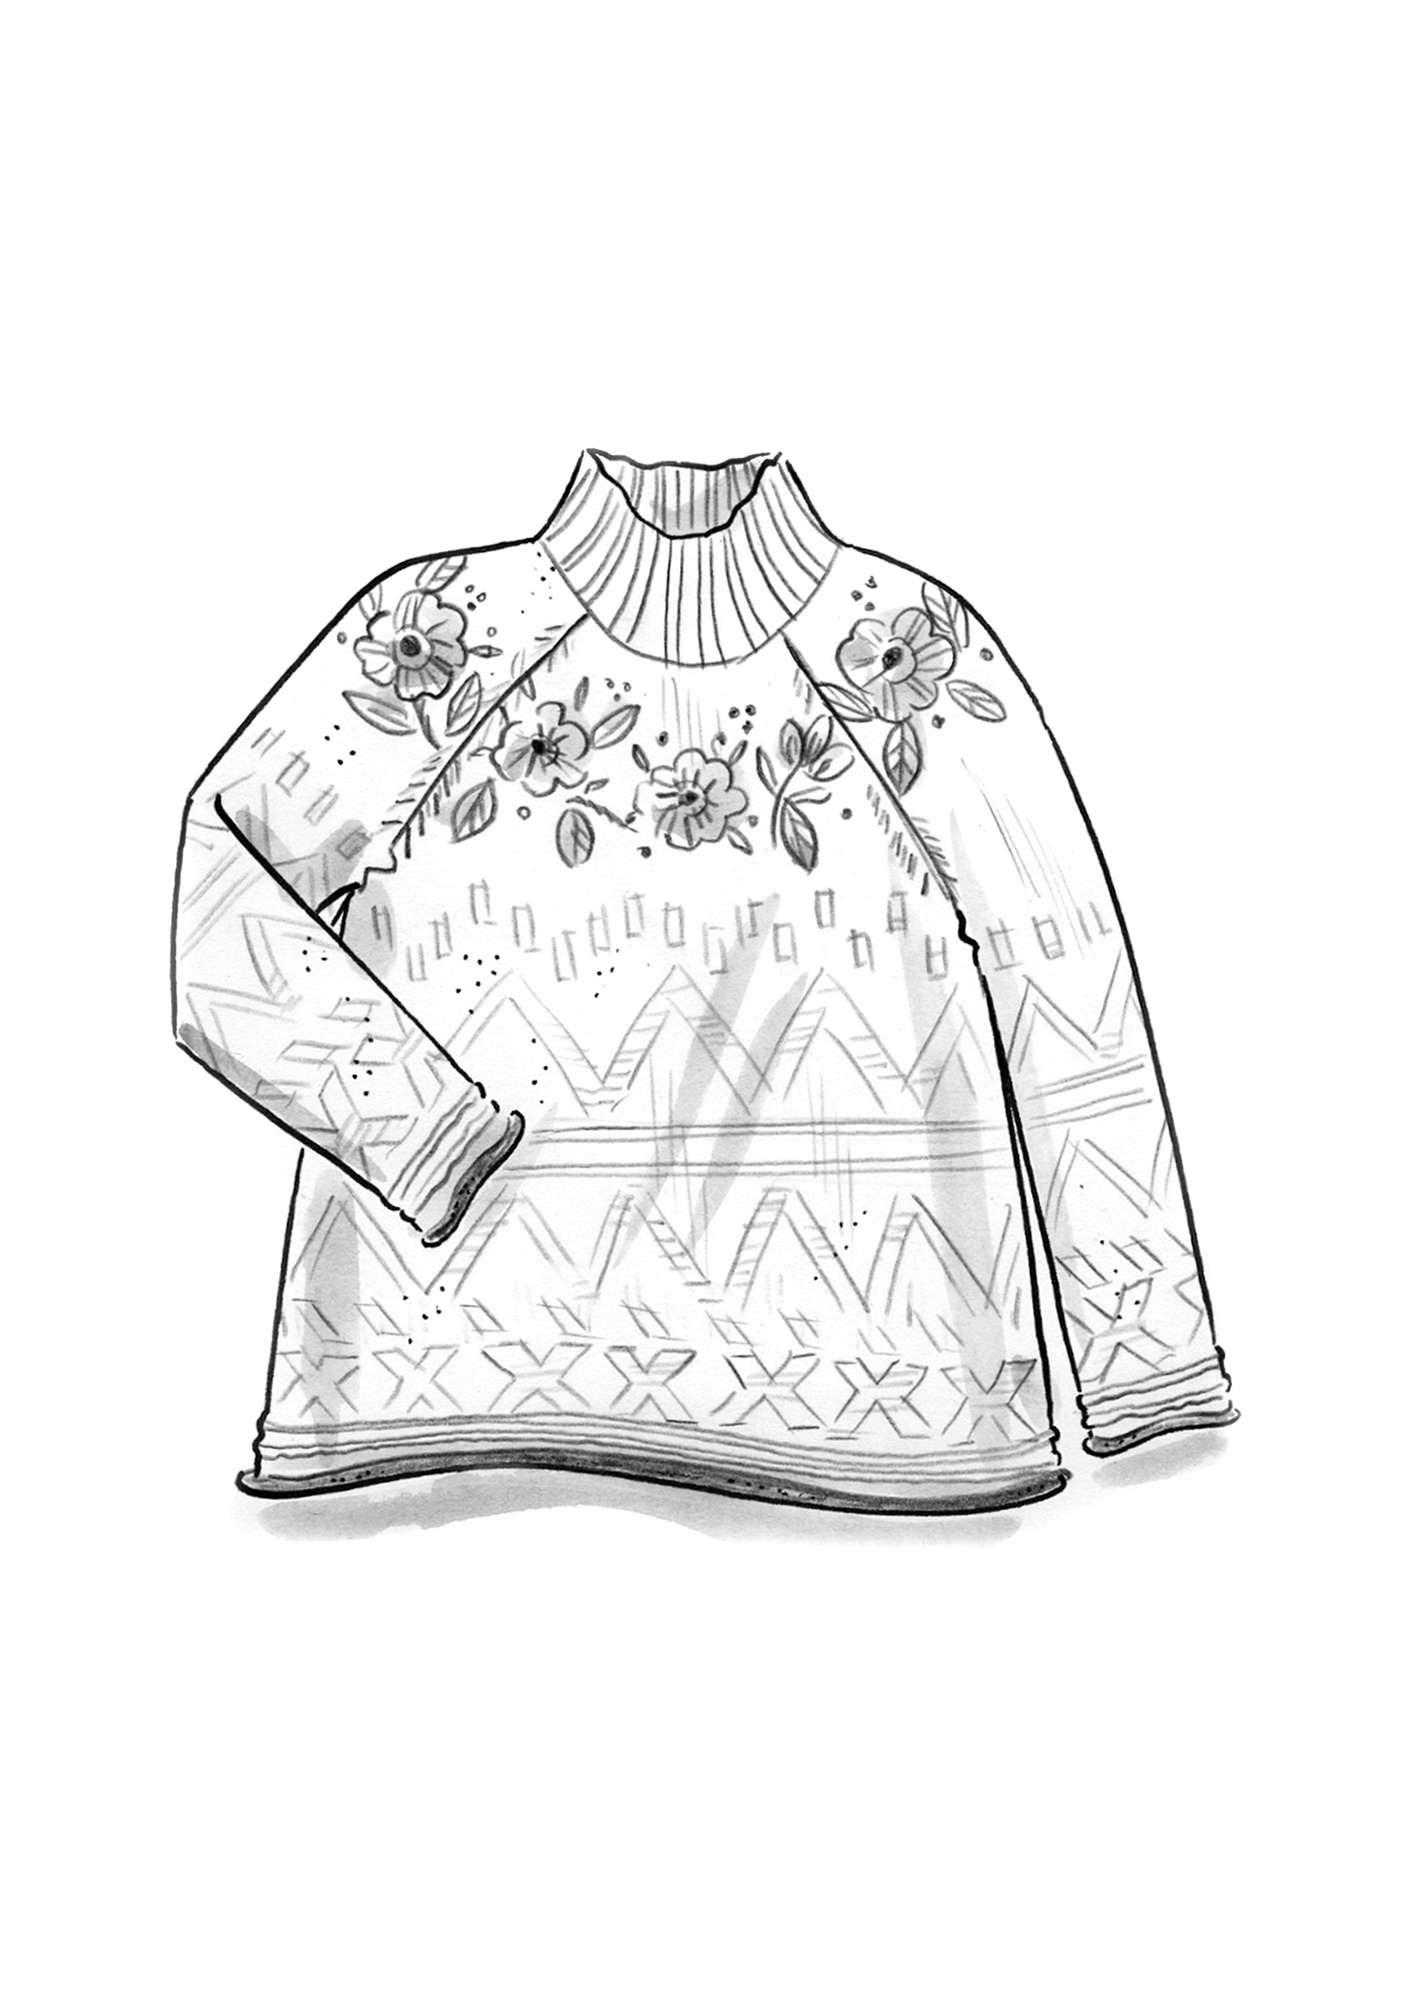 “Margrethe” hand-embroidered wool sweater cranberry